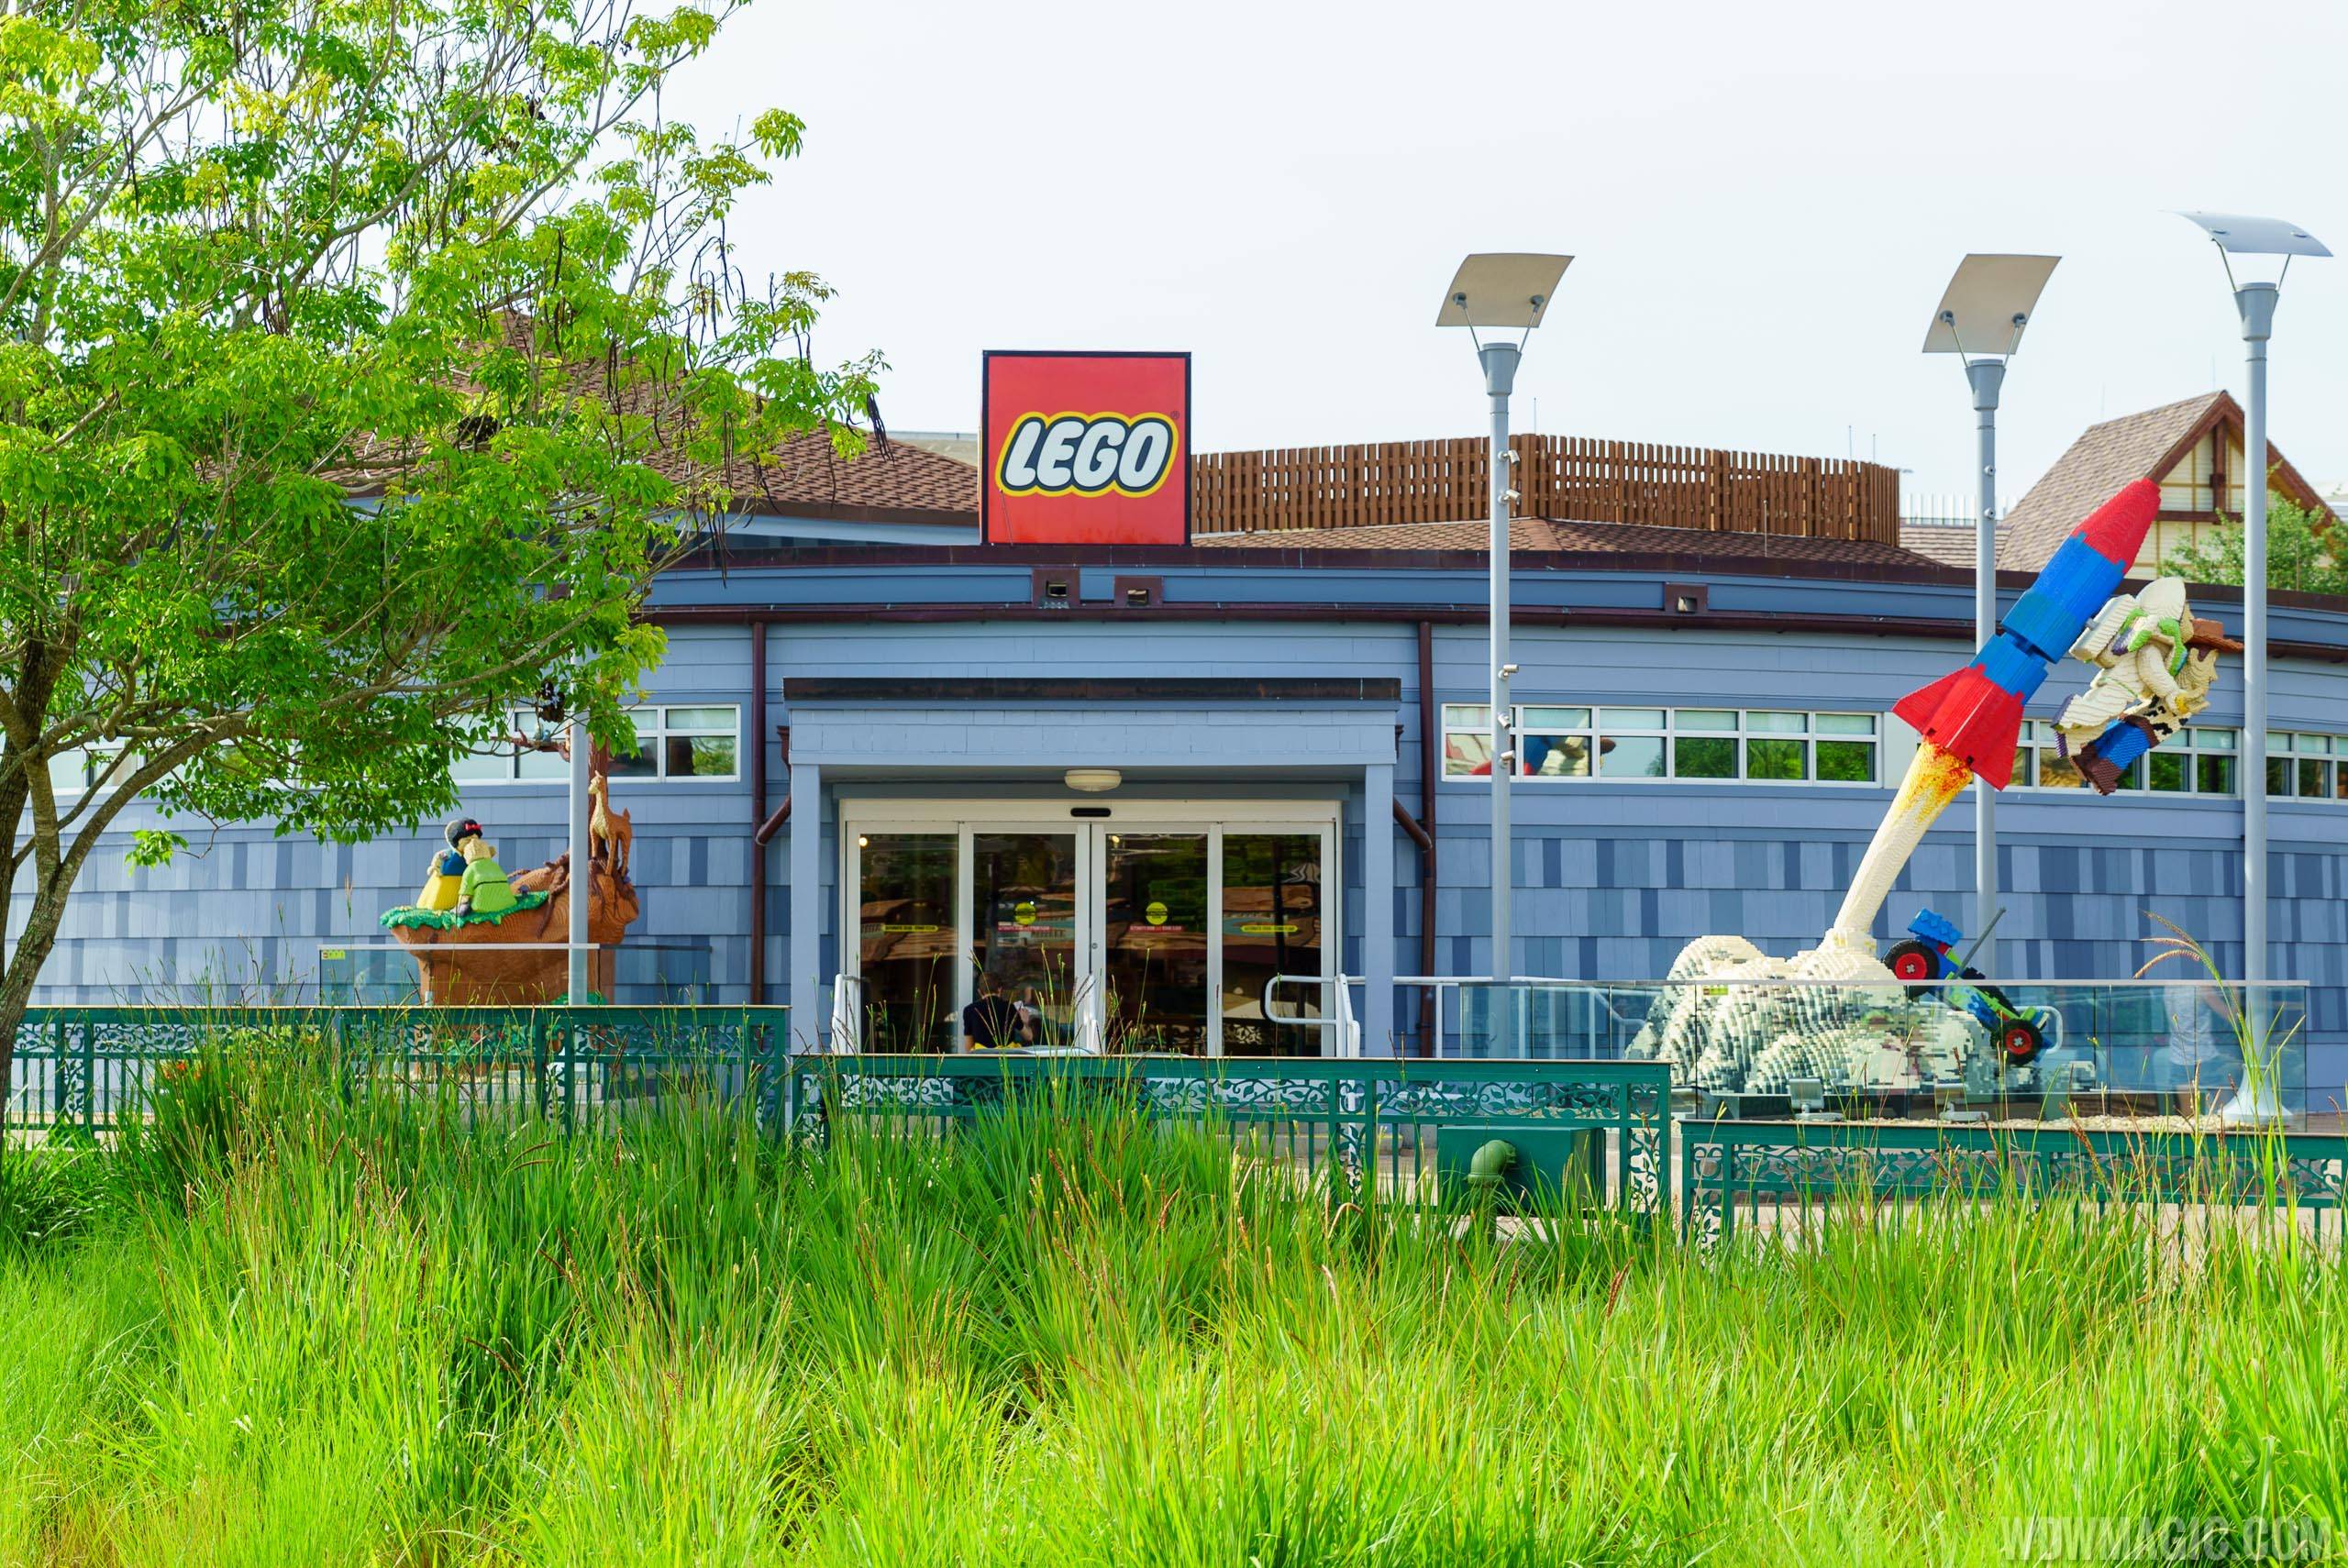 Lego Imagination Center to move to a temporary location later this month ahead of major renovation